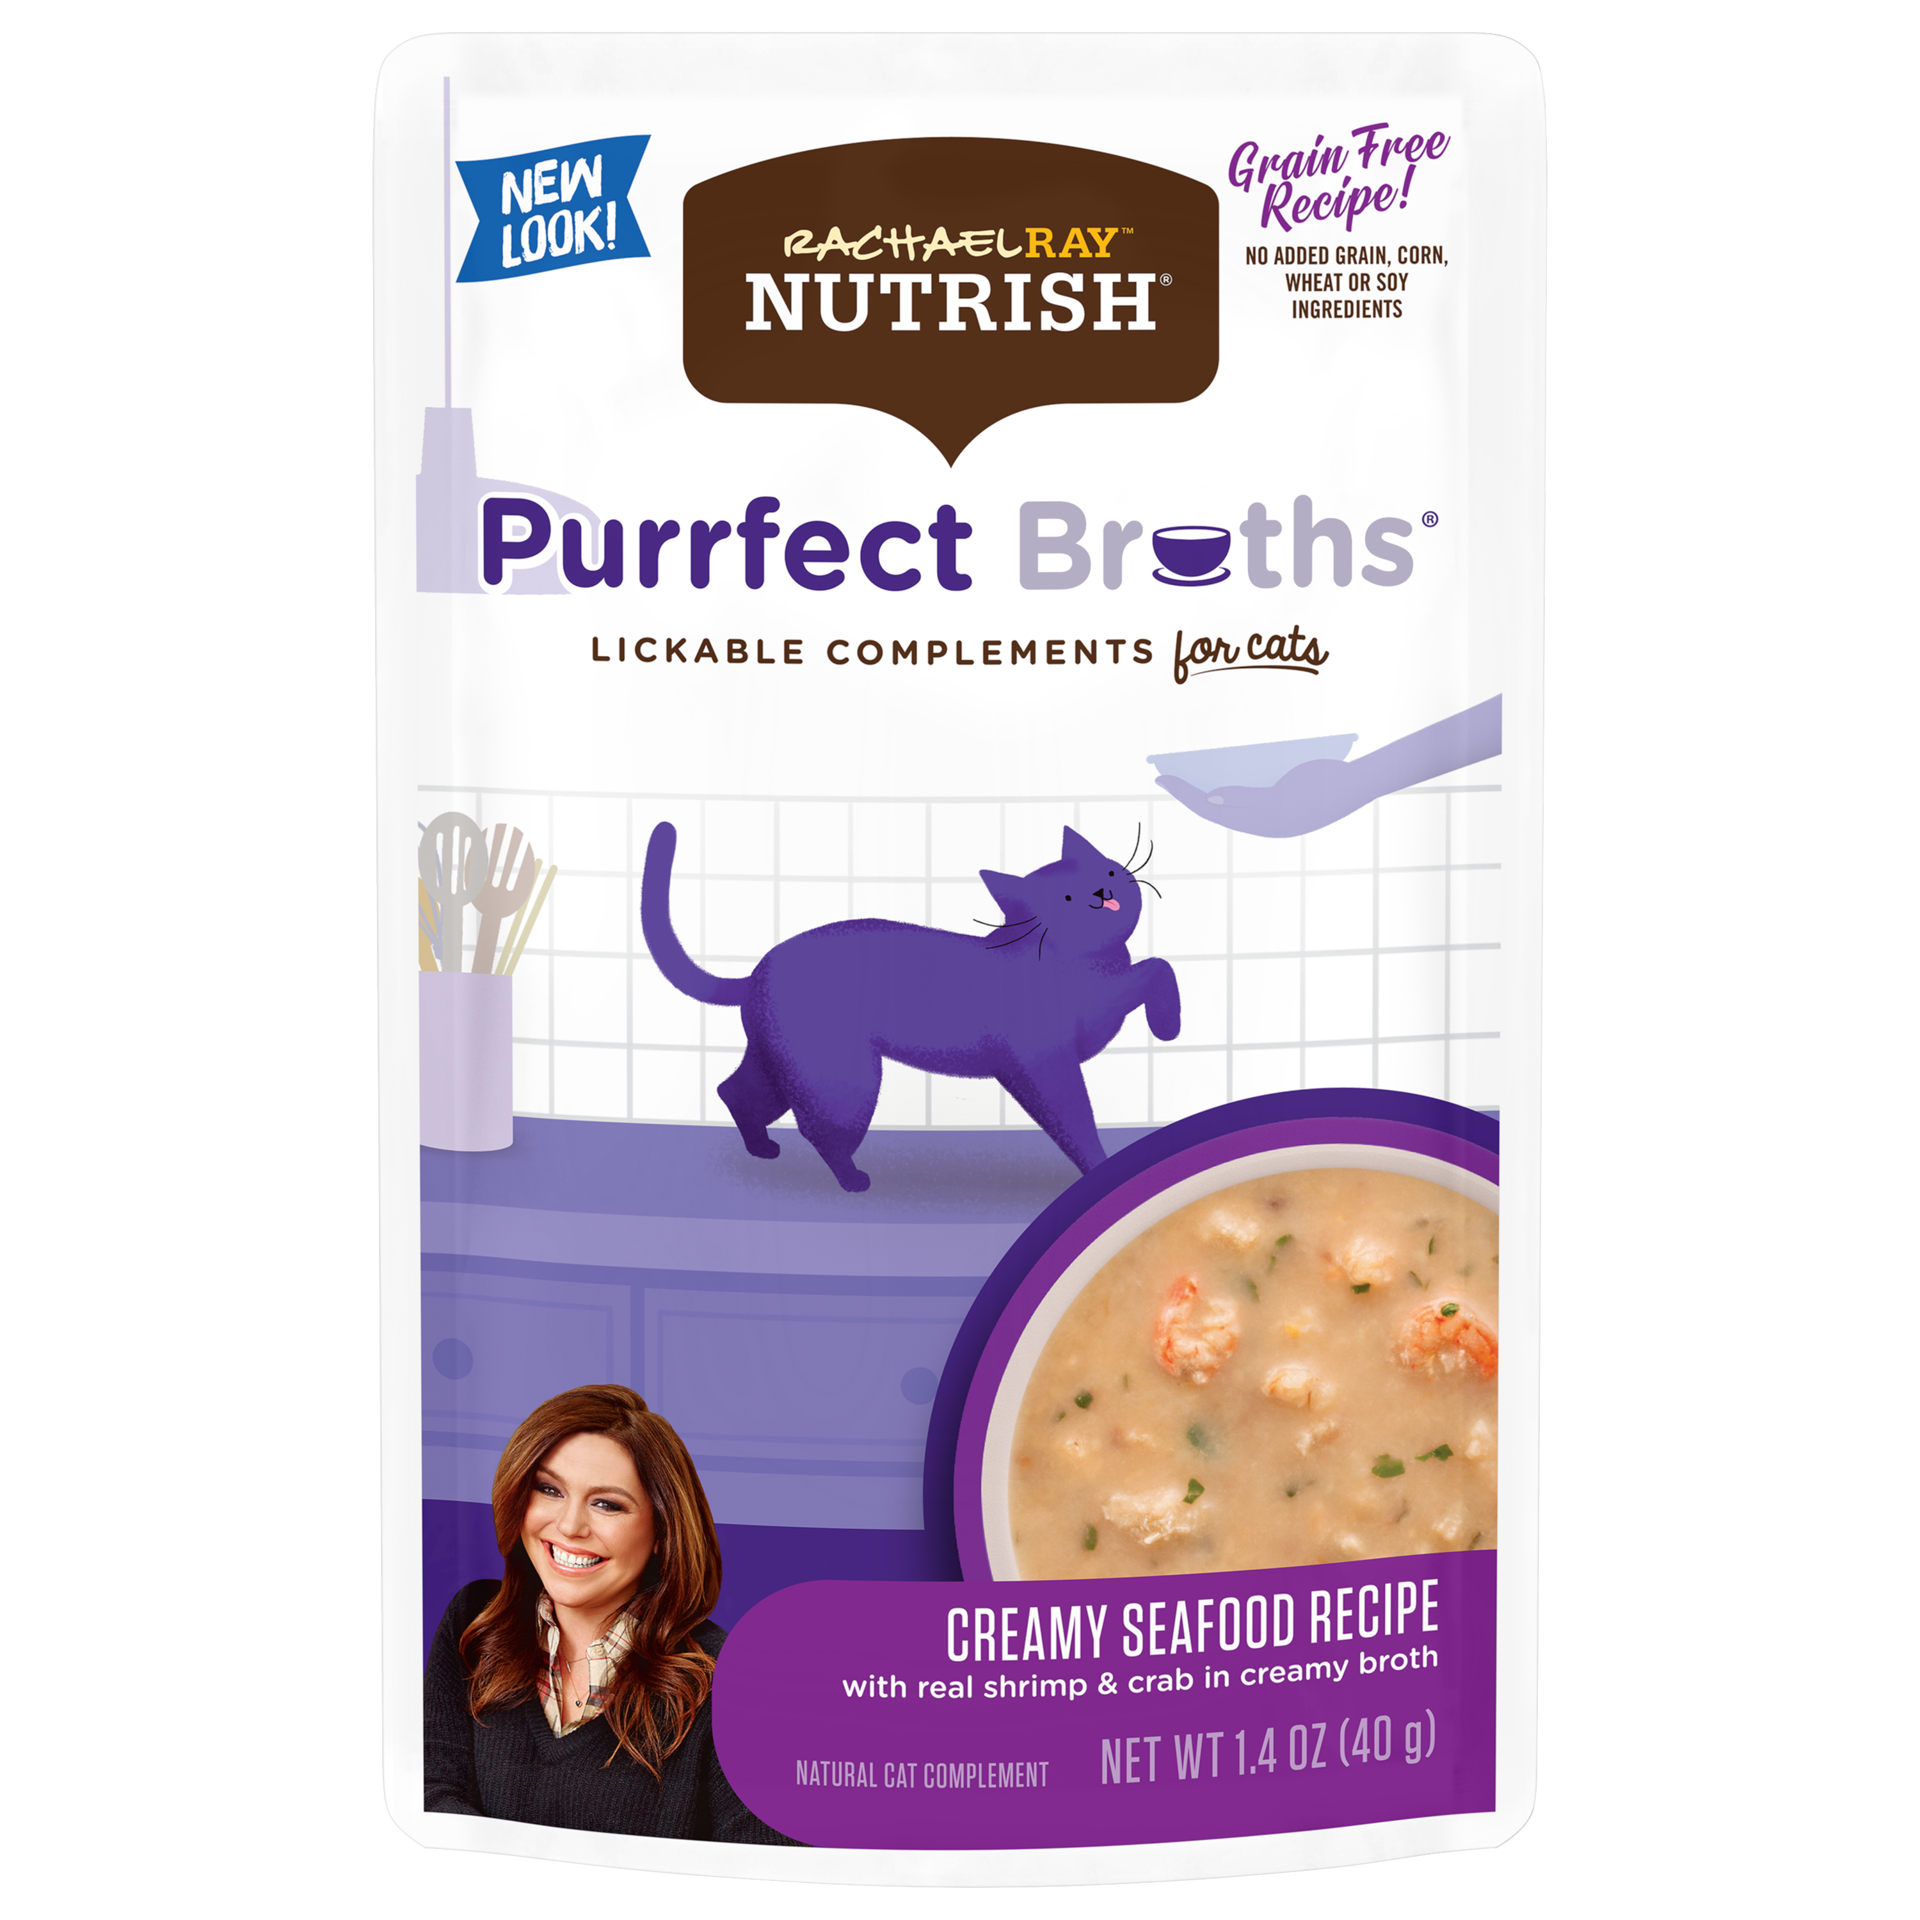 slide 1 of 6, Rachael Ray Nutrish Purrfect Broths Lickable Cat Treats and Meal Complements, Creamy Seafood Recipe, 1.4 Ounce Pouch, 1.4 oz